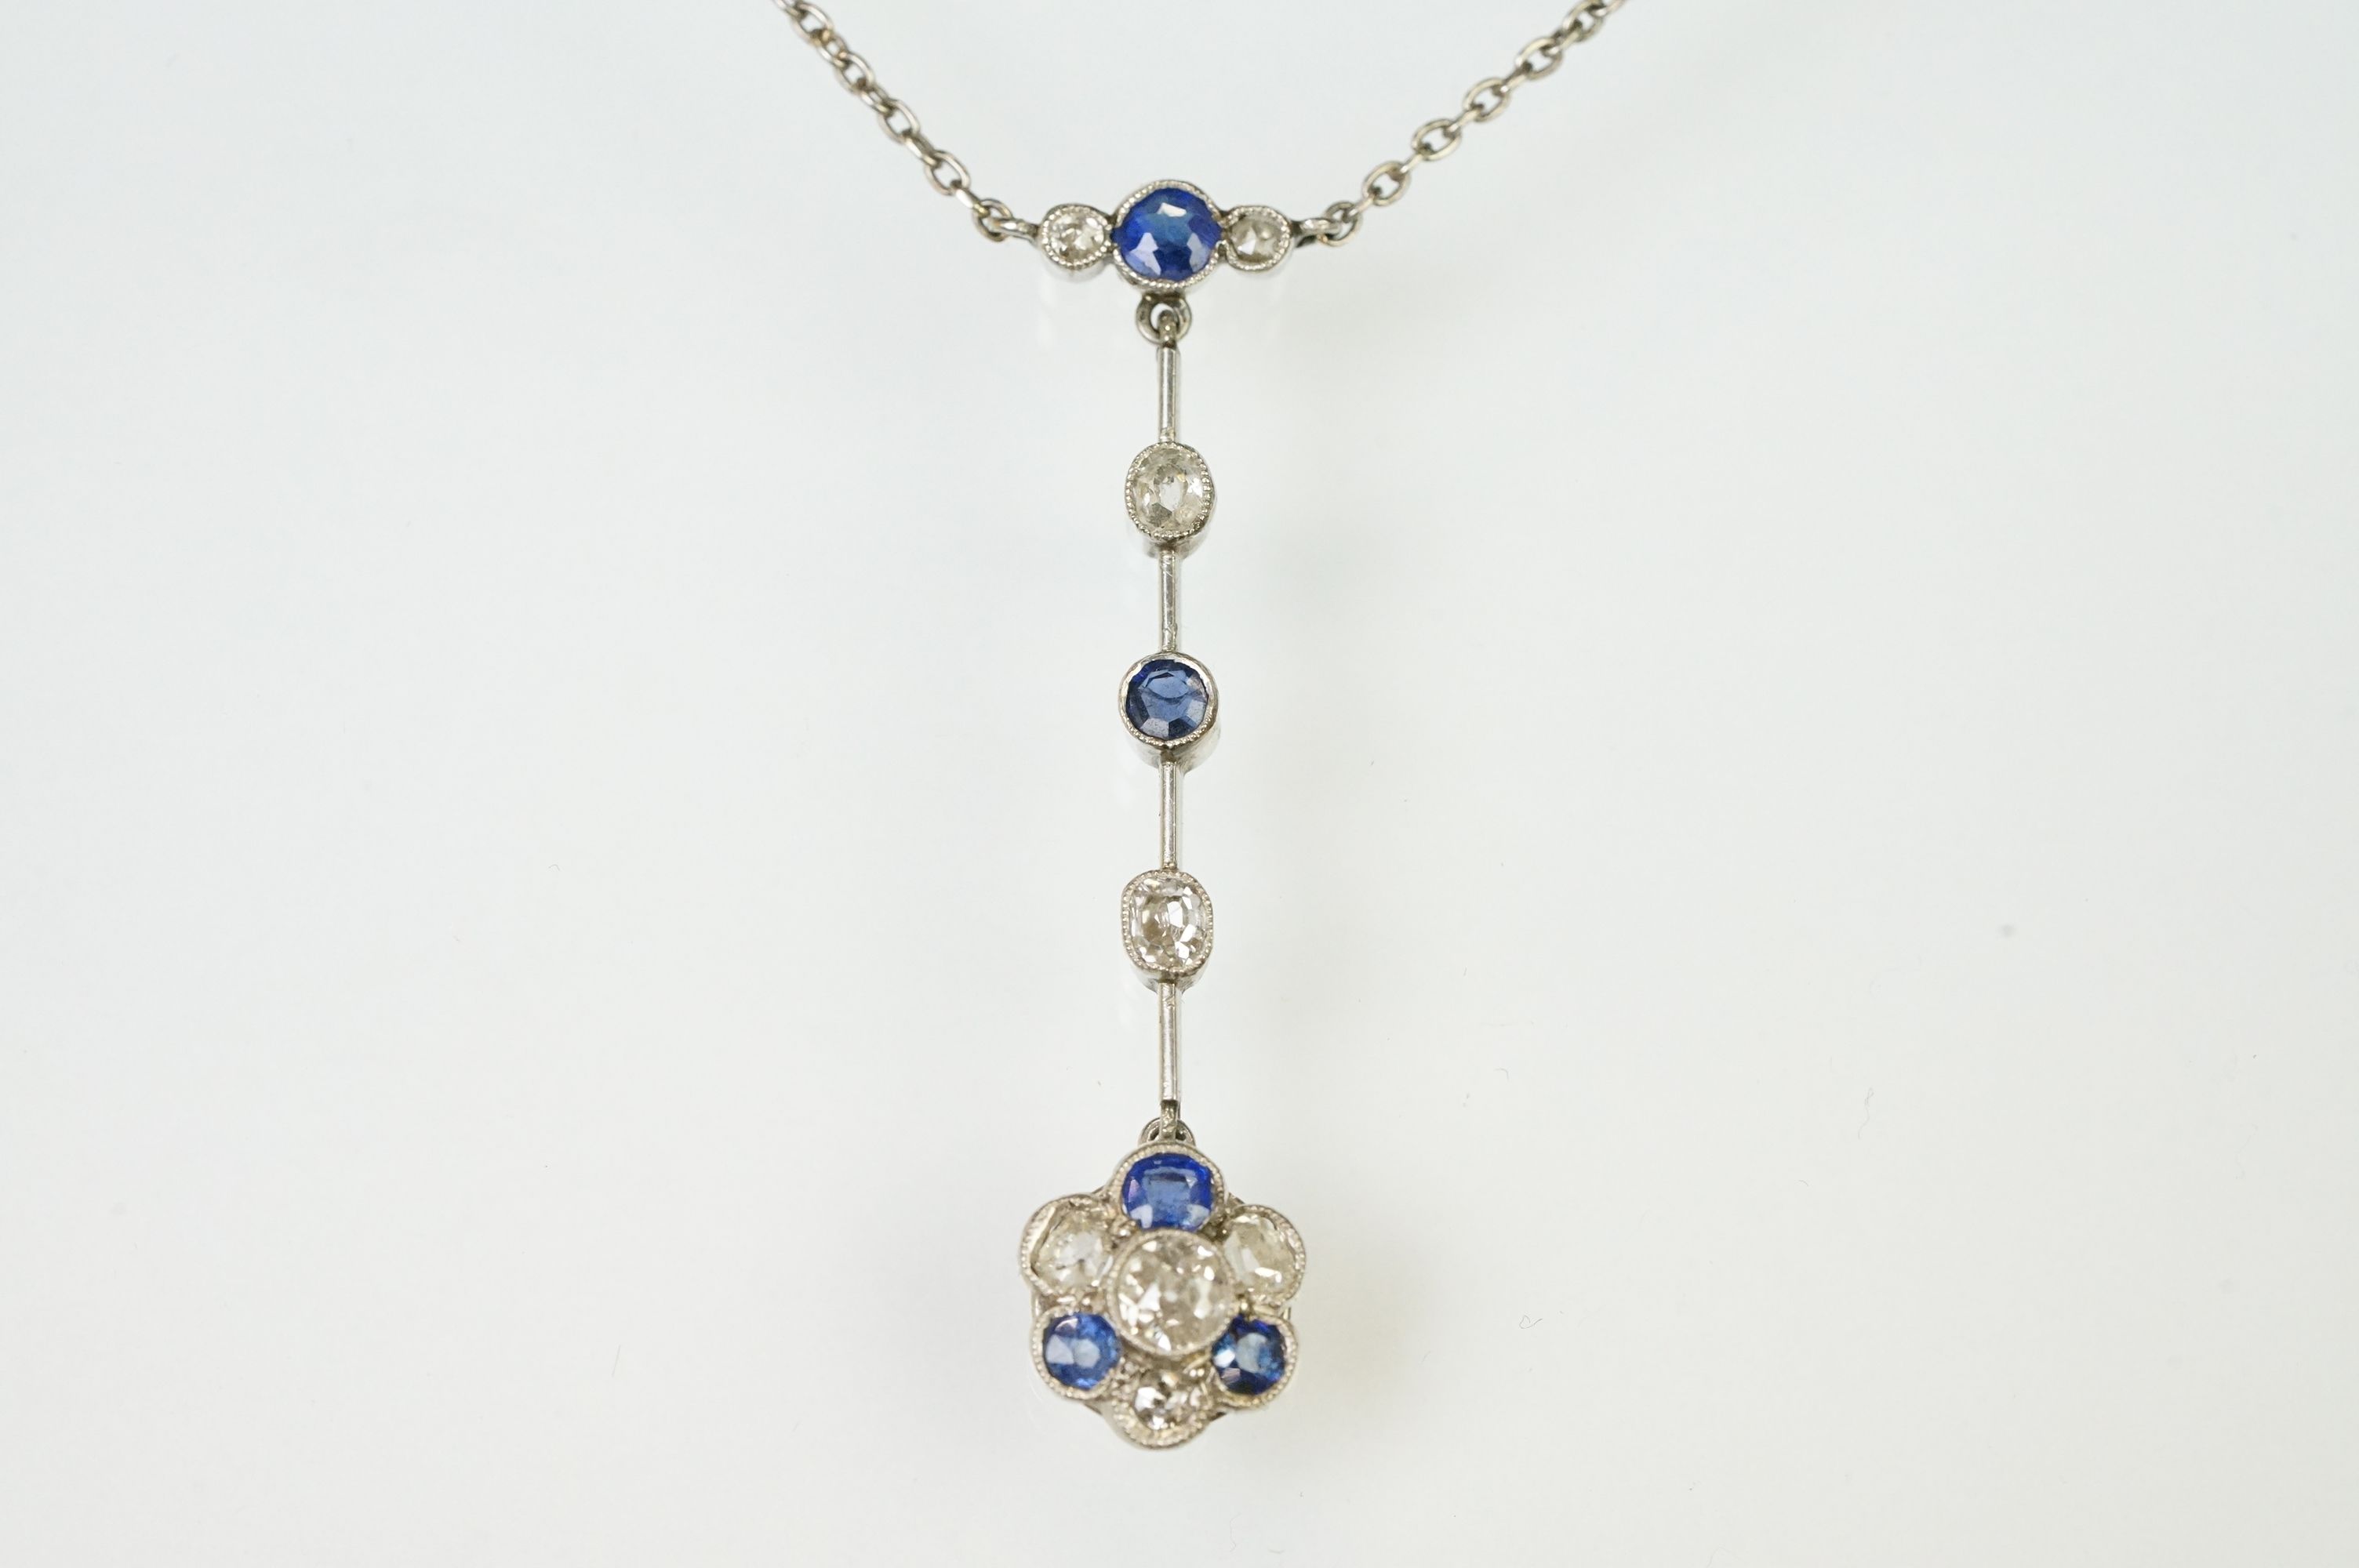 Early 20th Century Edwardian sapphire and diamond pendant necklace. The necklace having a pendant